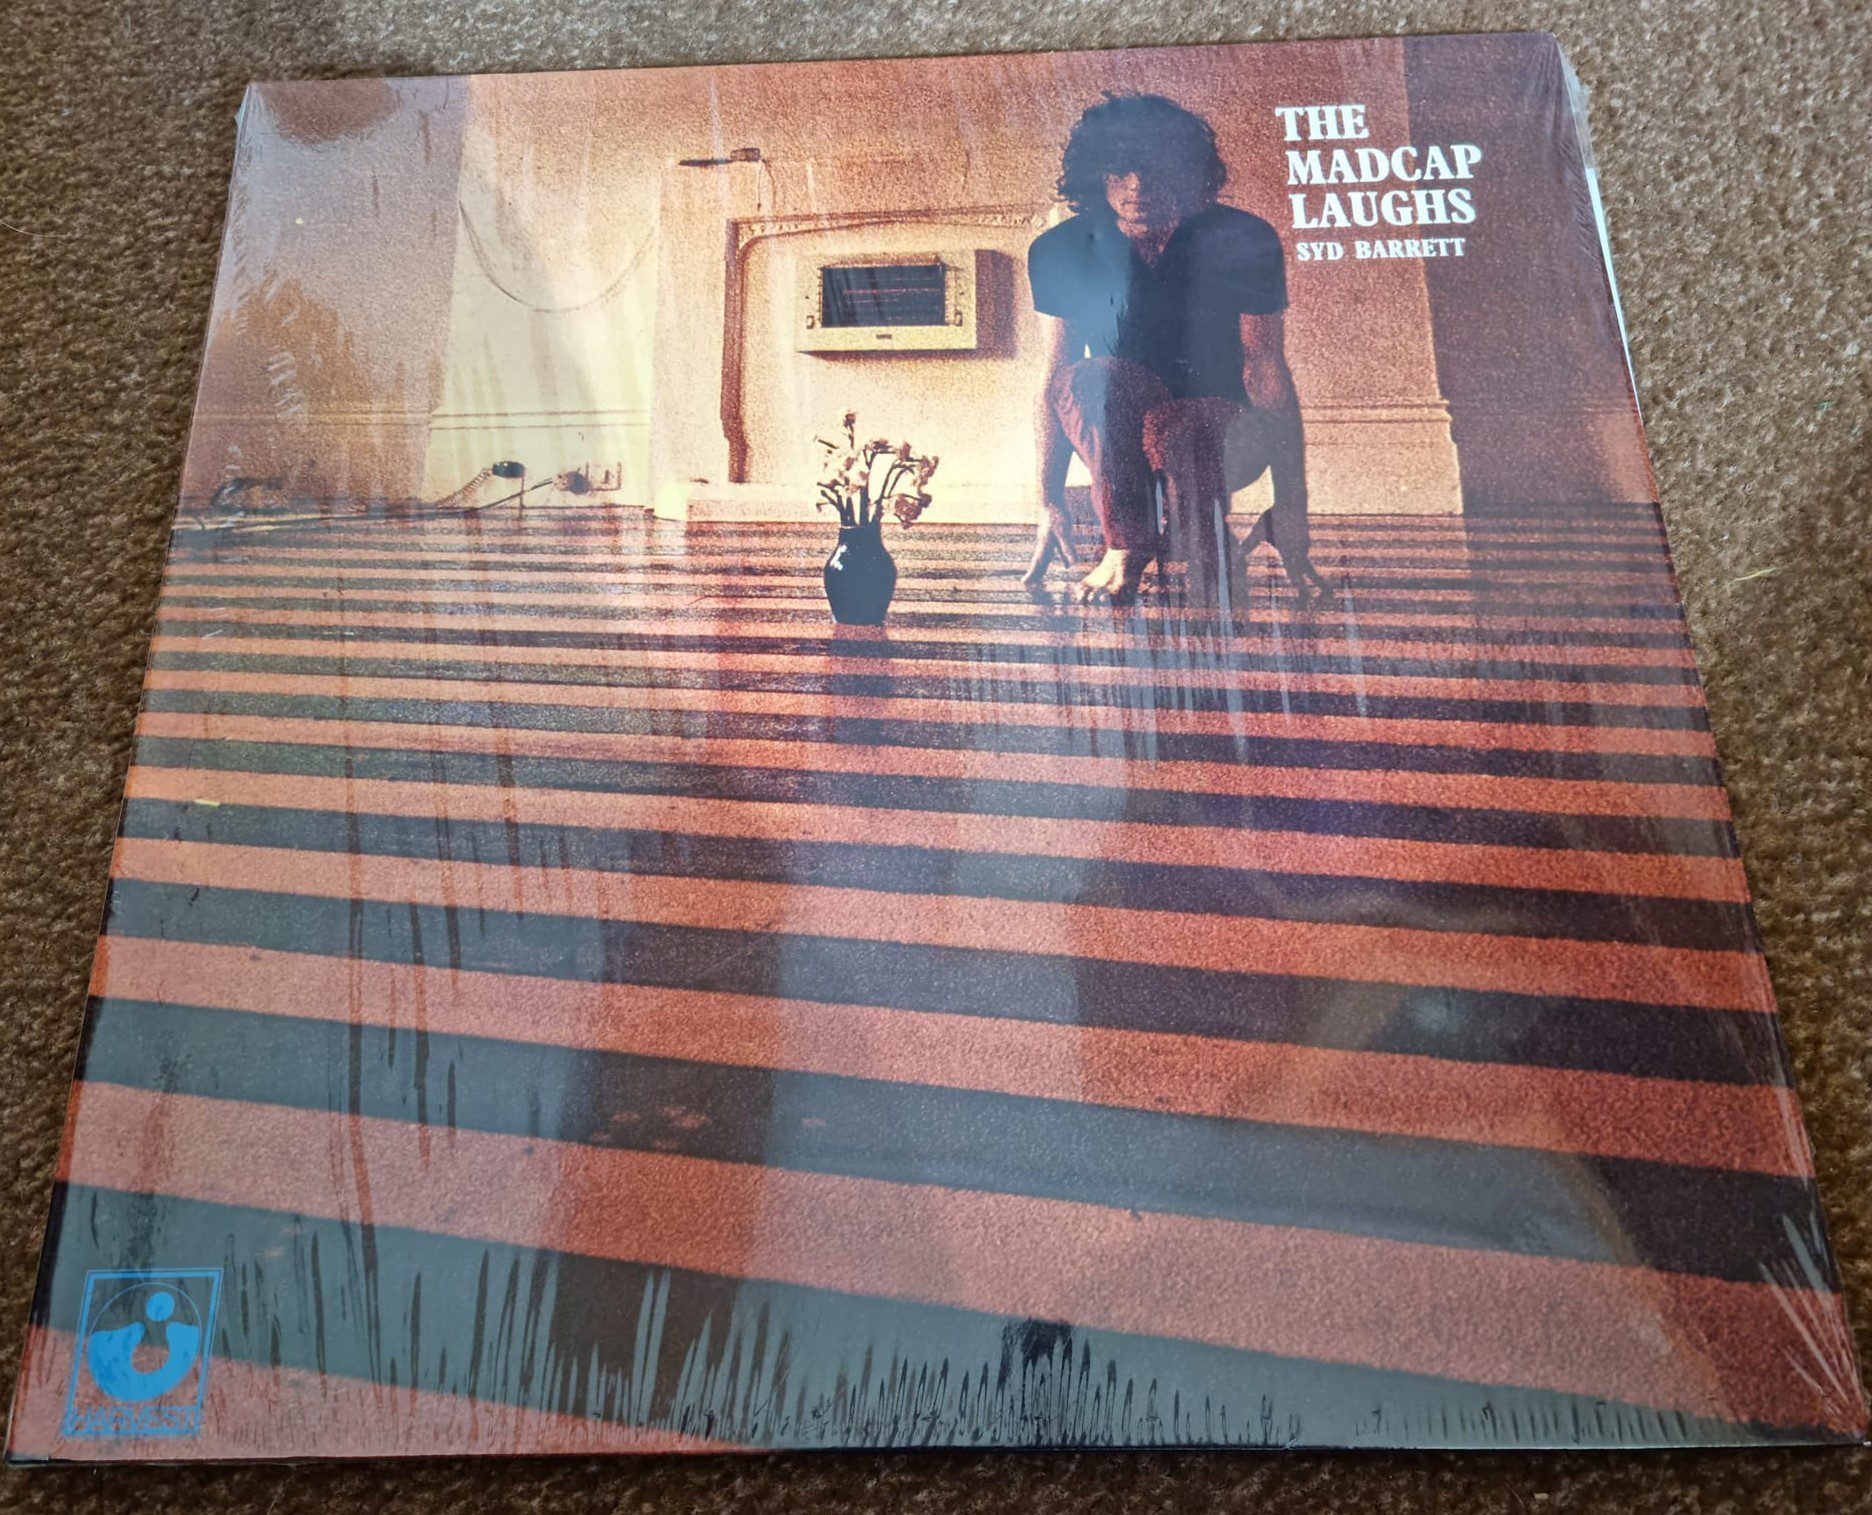 Buy this rare Syd Barrett record by clicking here